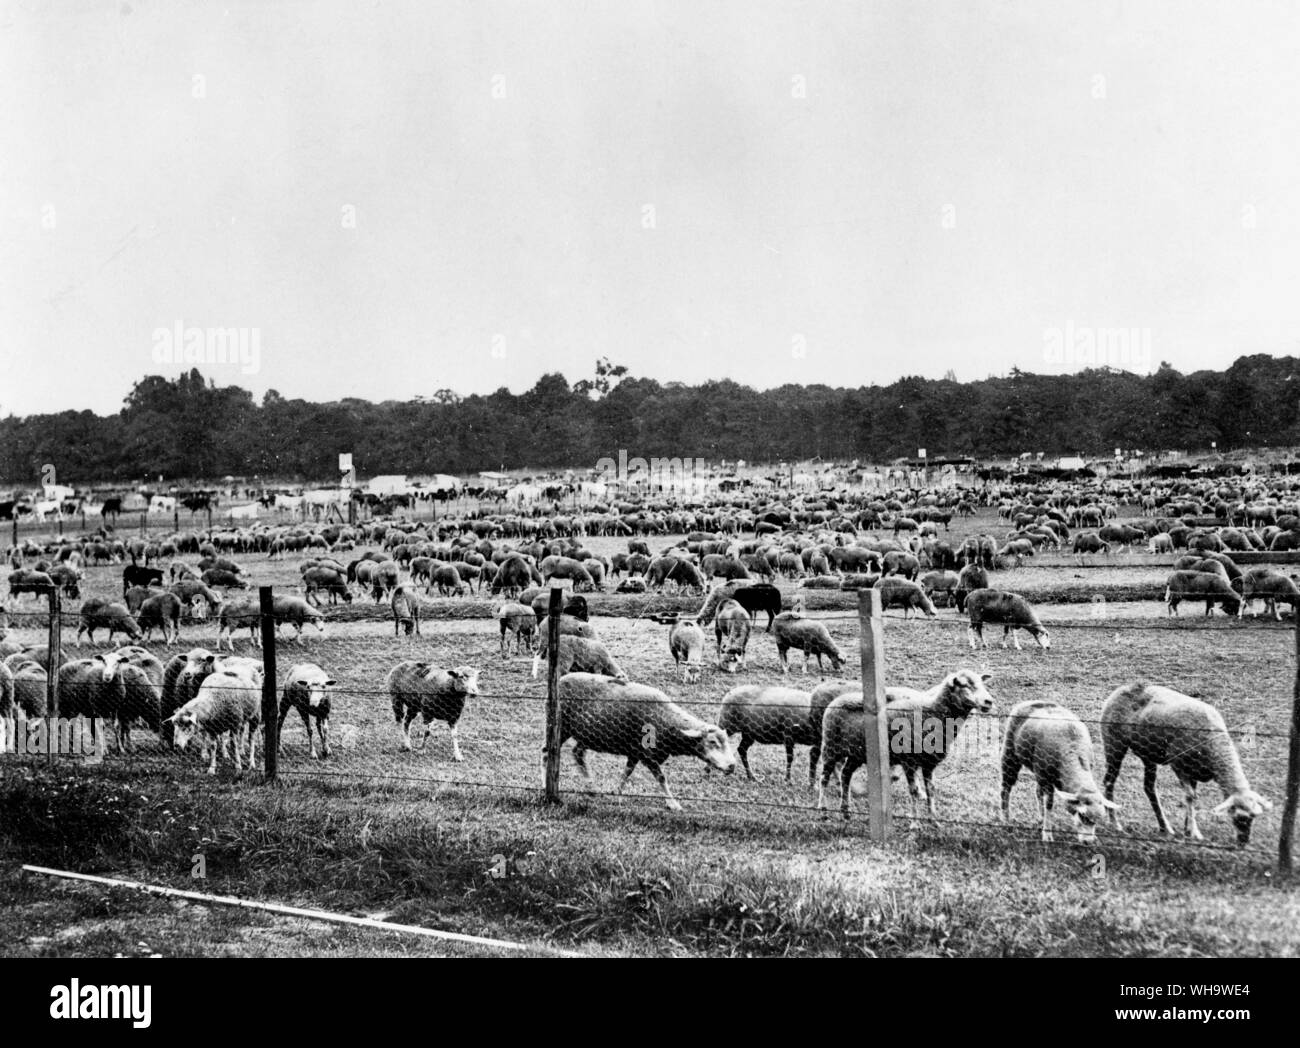 WW1: Sheep and cattle in pens in public parks, Paris. Sept. 1914. Stock Photo